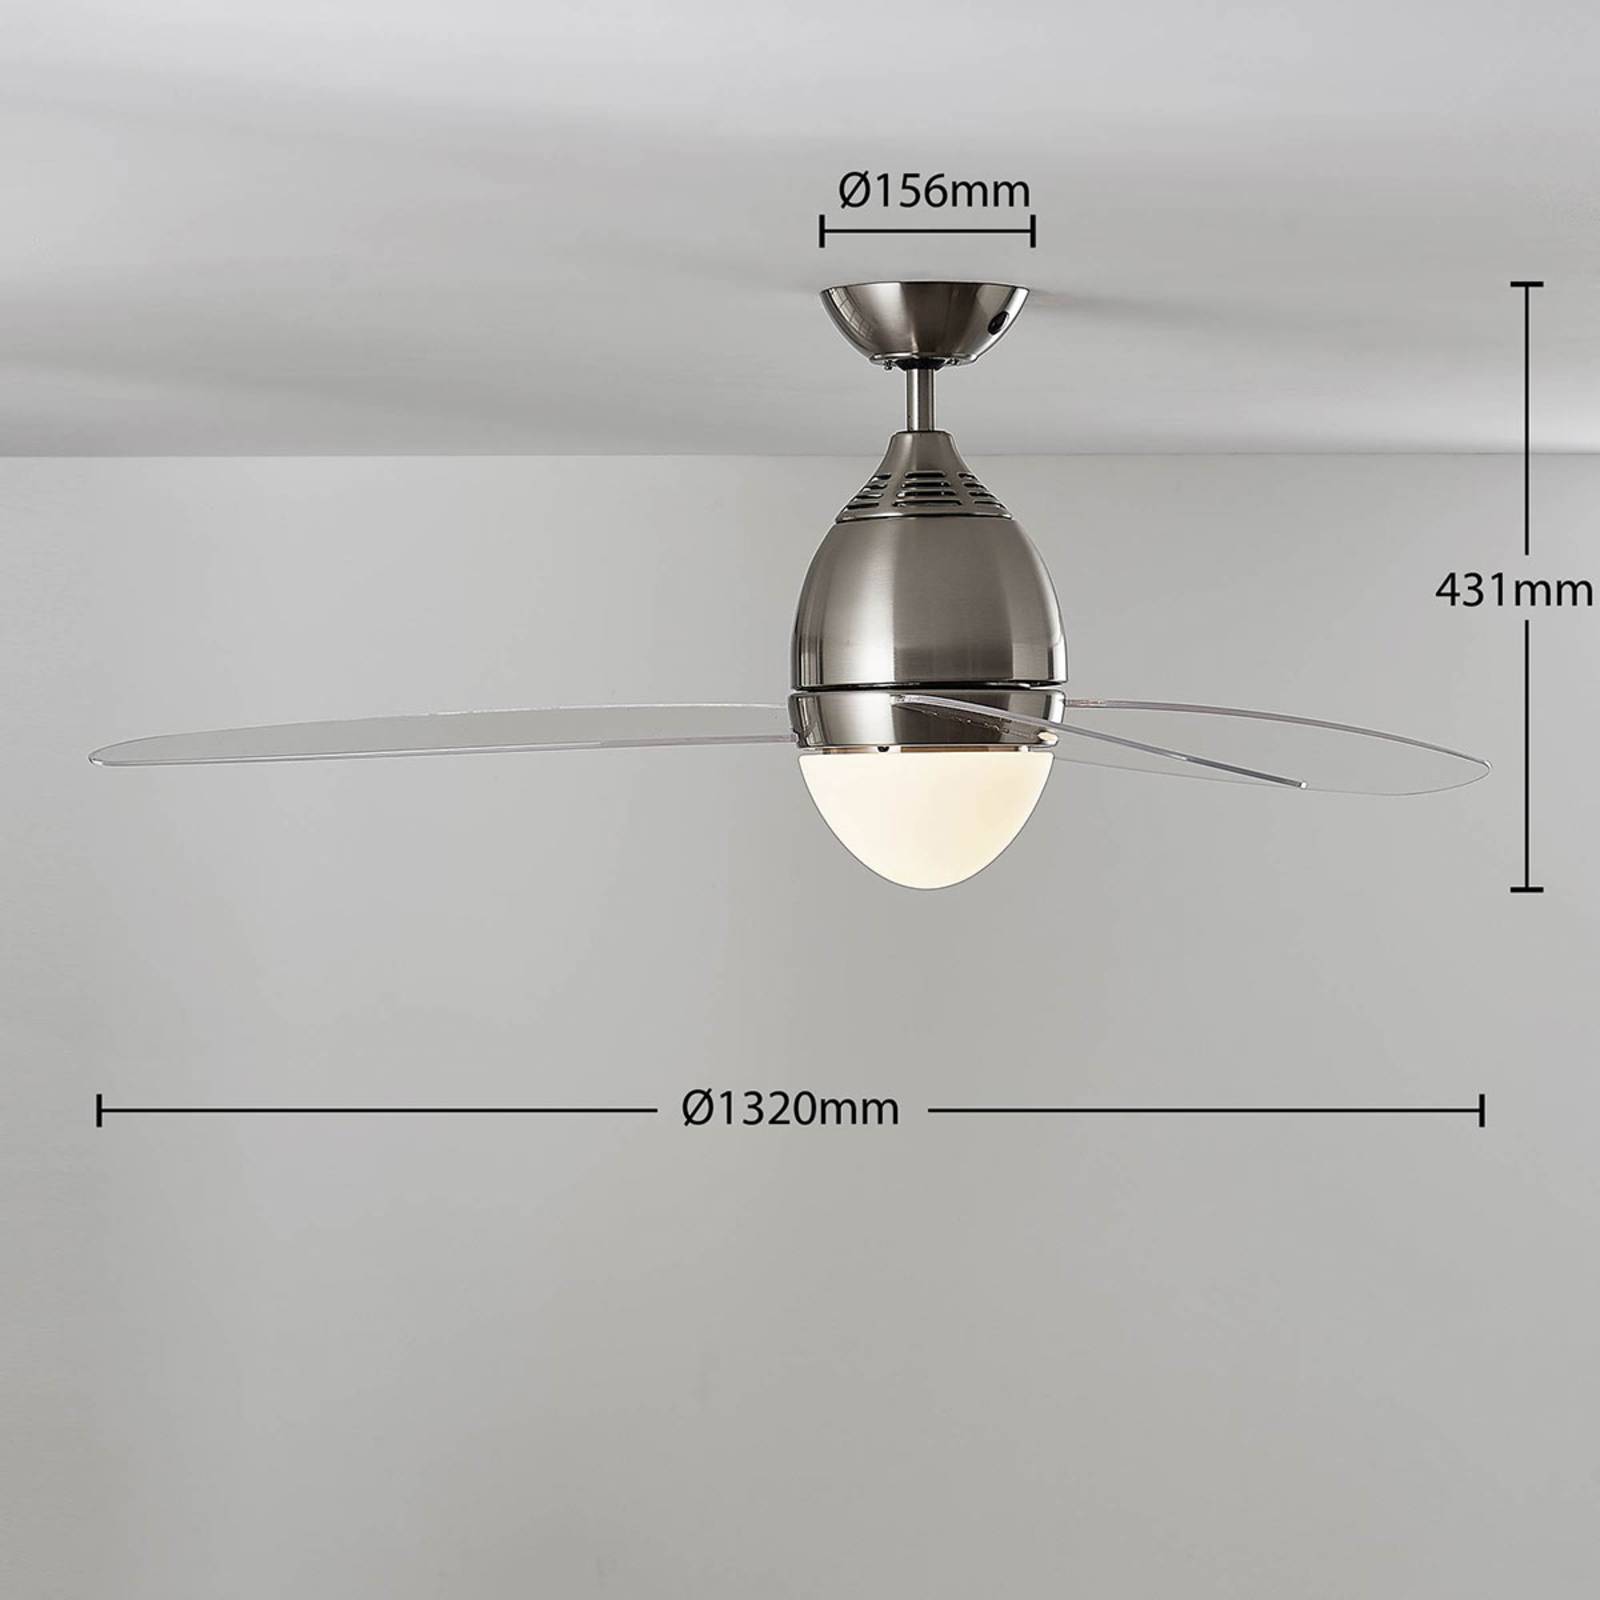 Piara ceiling fan with light, clear